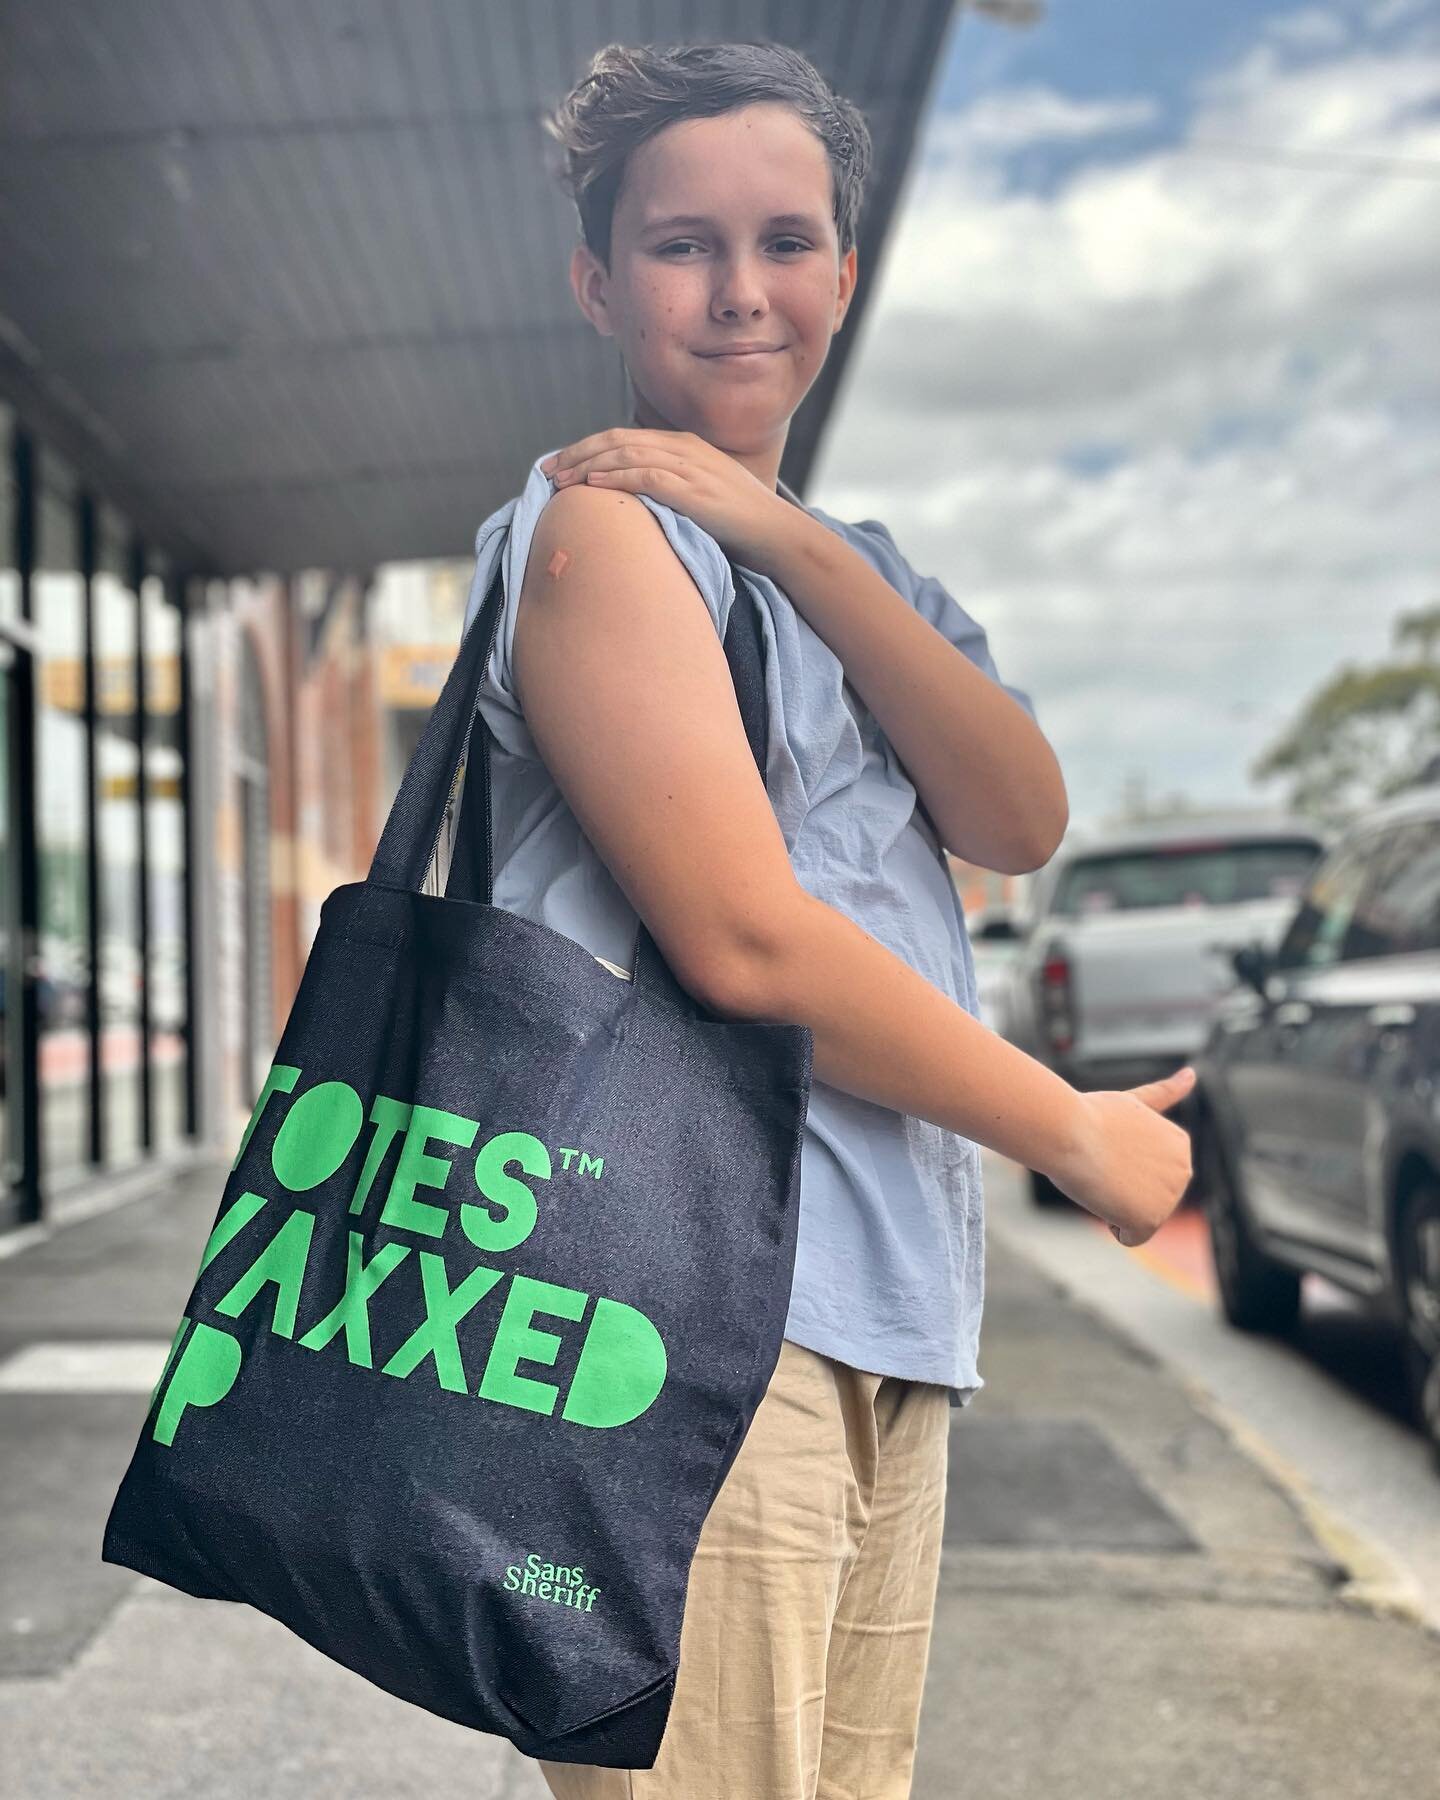 12 years, 3 weeks old and he&rsquo;s now #totesvaxxed up. Must be the youngest vaxxed person in the country today. I&rsquo;m super proud of this boy. He was keen to get it done. He knows he&rsquo;s one step closer to seeing his family in the UK and W